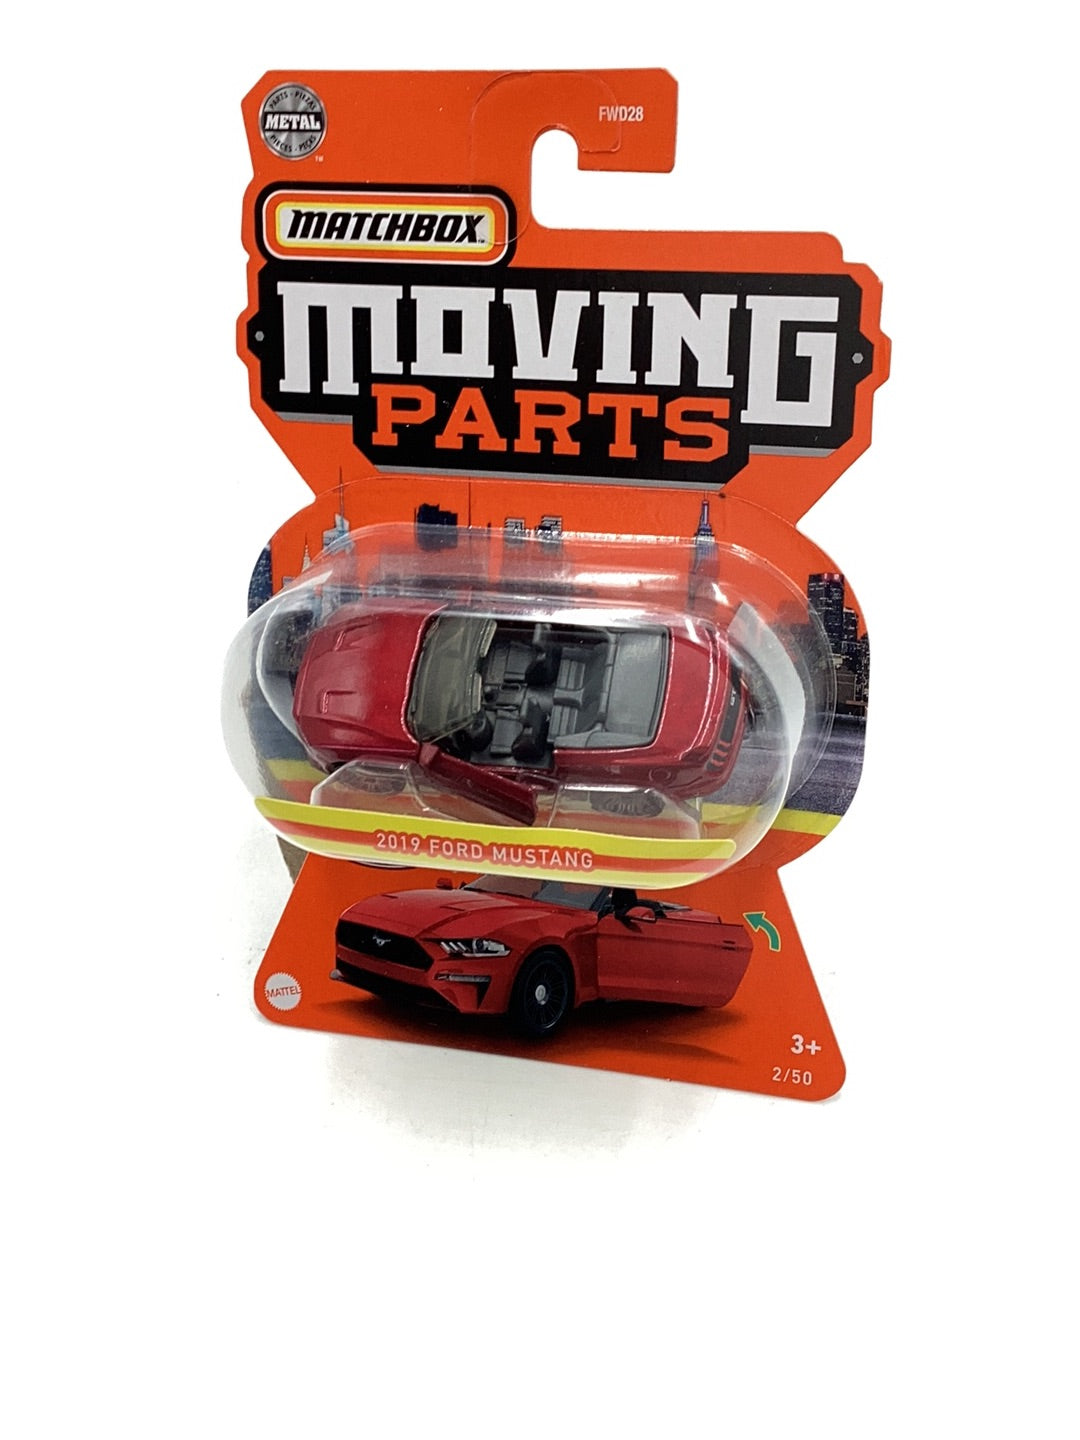 Matchbox Moving Parts 2019 Ford Mustang 2/50 165I